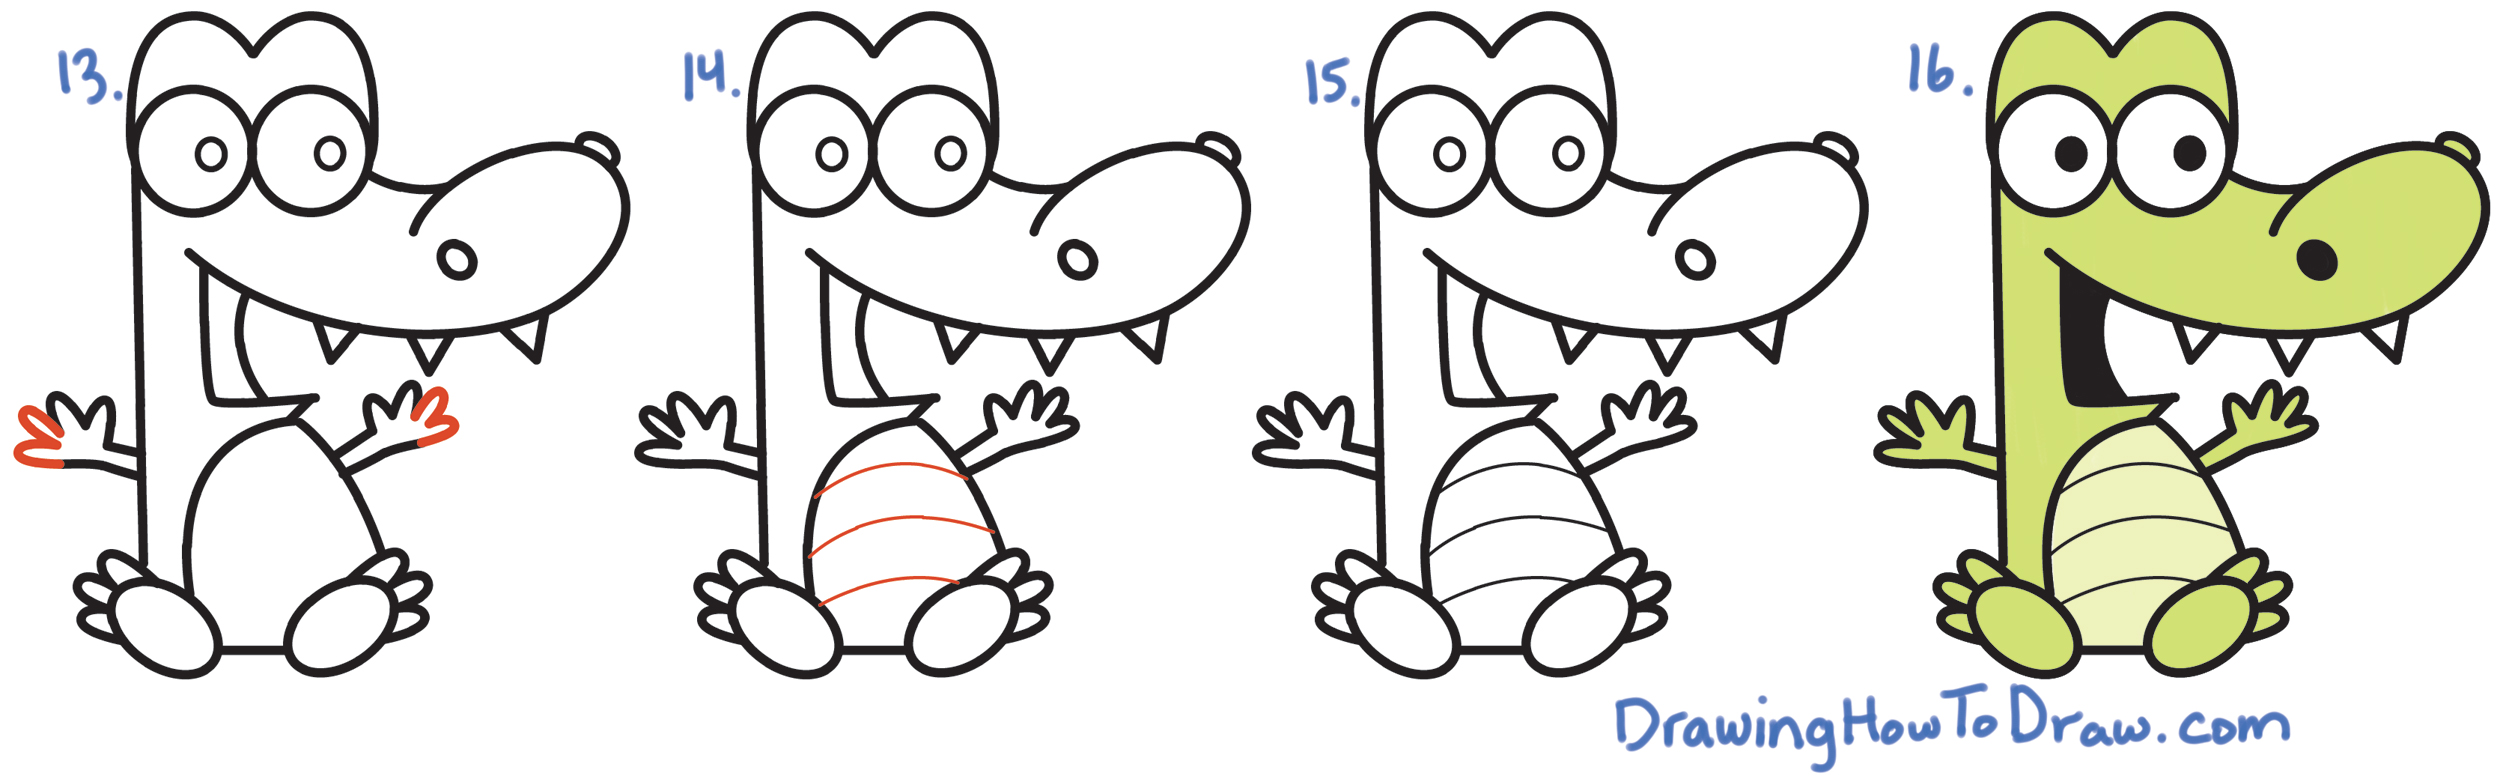 Learn How to Draw Cartoon Crocodiles or Alligators from Numbers Simple Steps Drawing Lesson for Children & Beginners